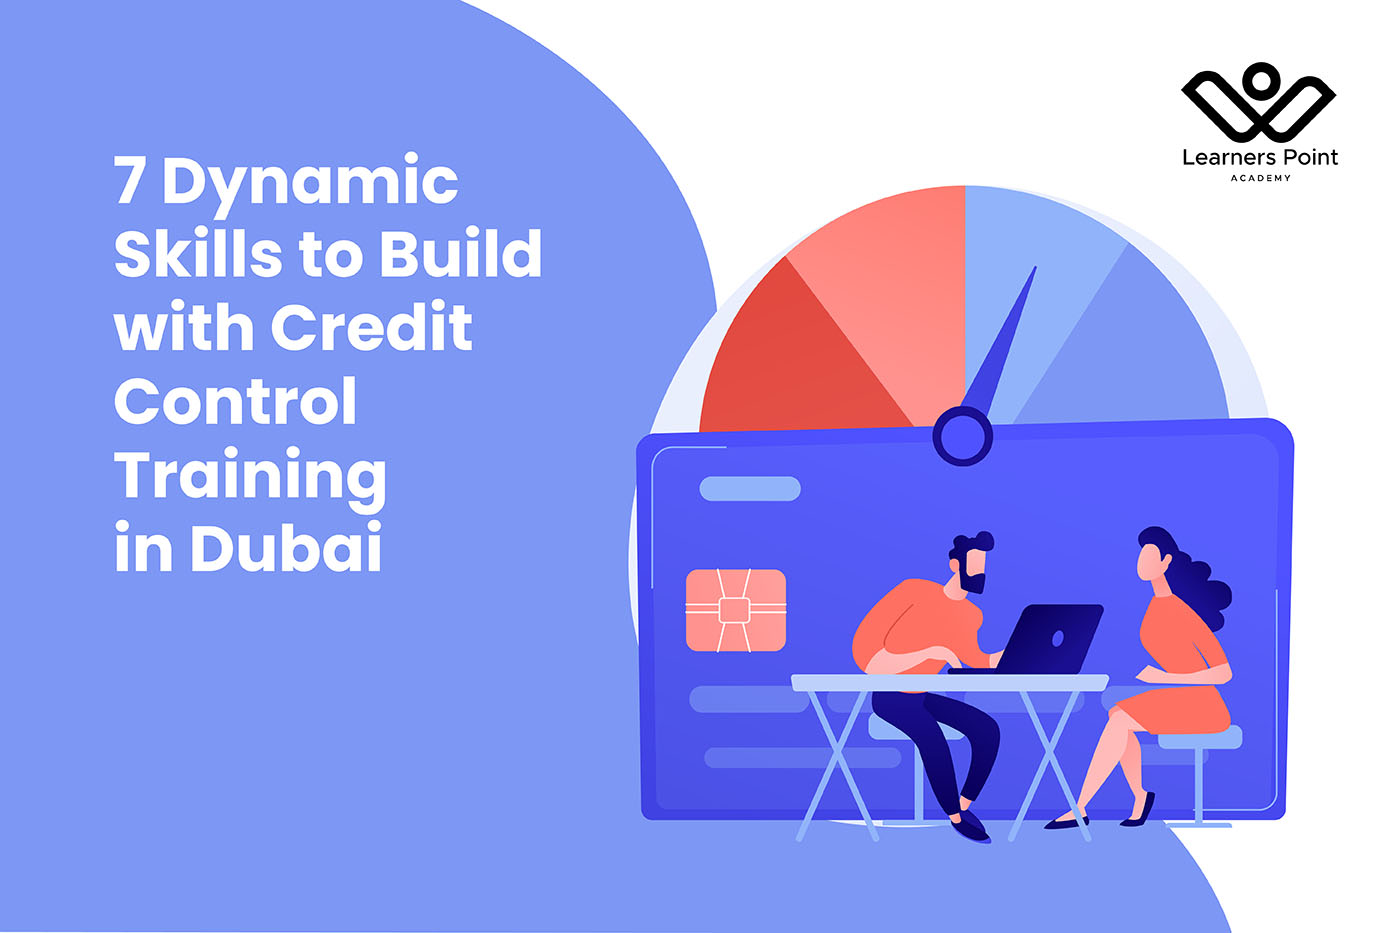 7 Dynamic Skills to Build with Credit Control Training in Dubai